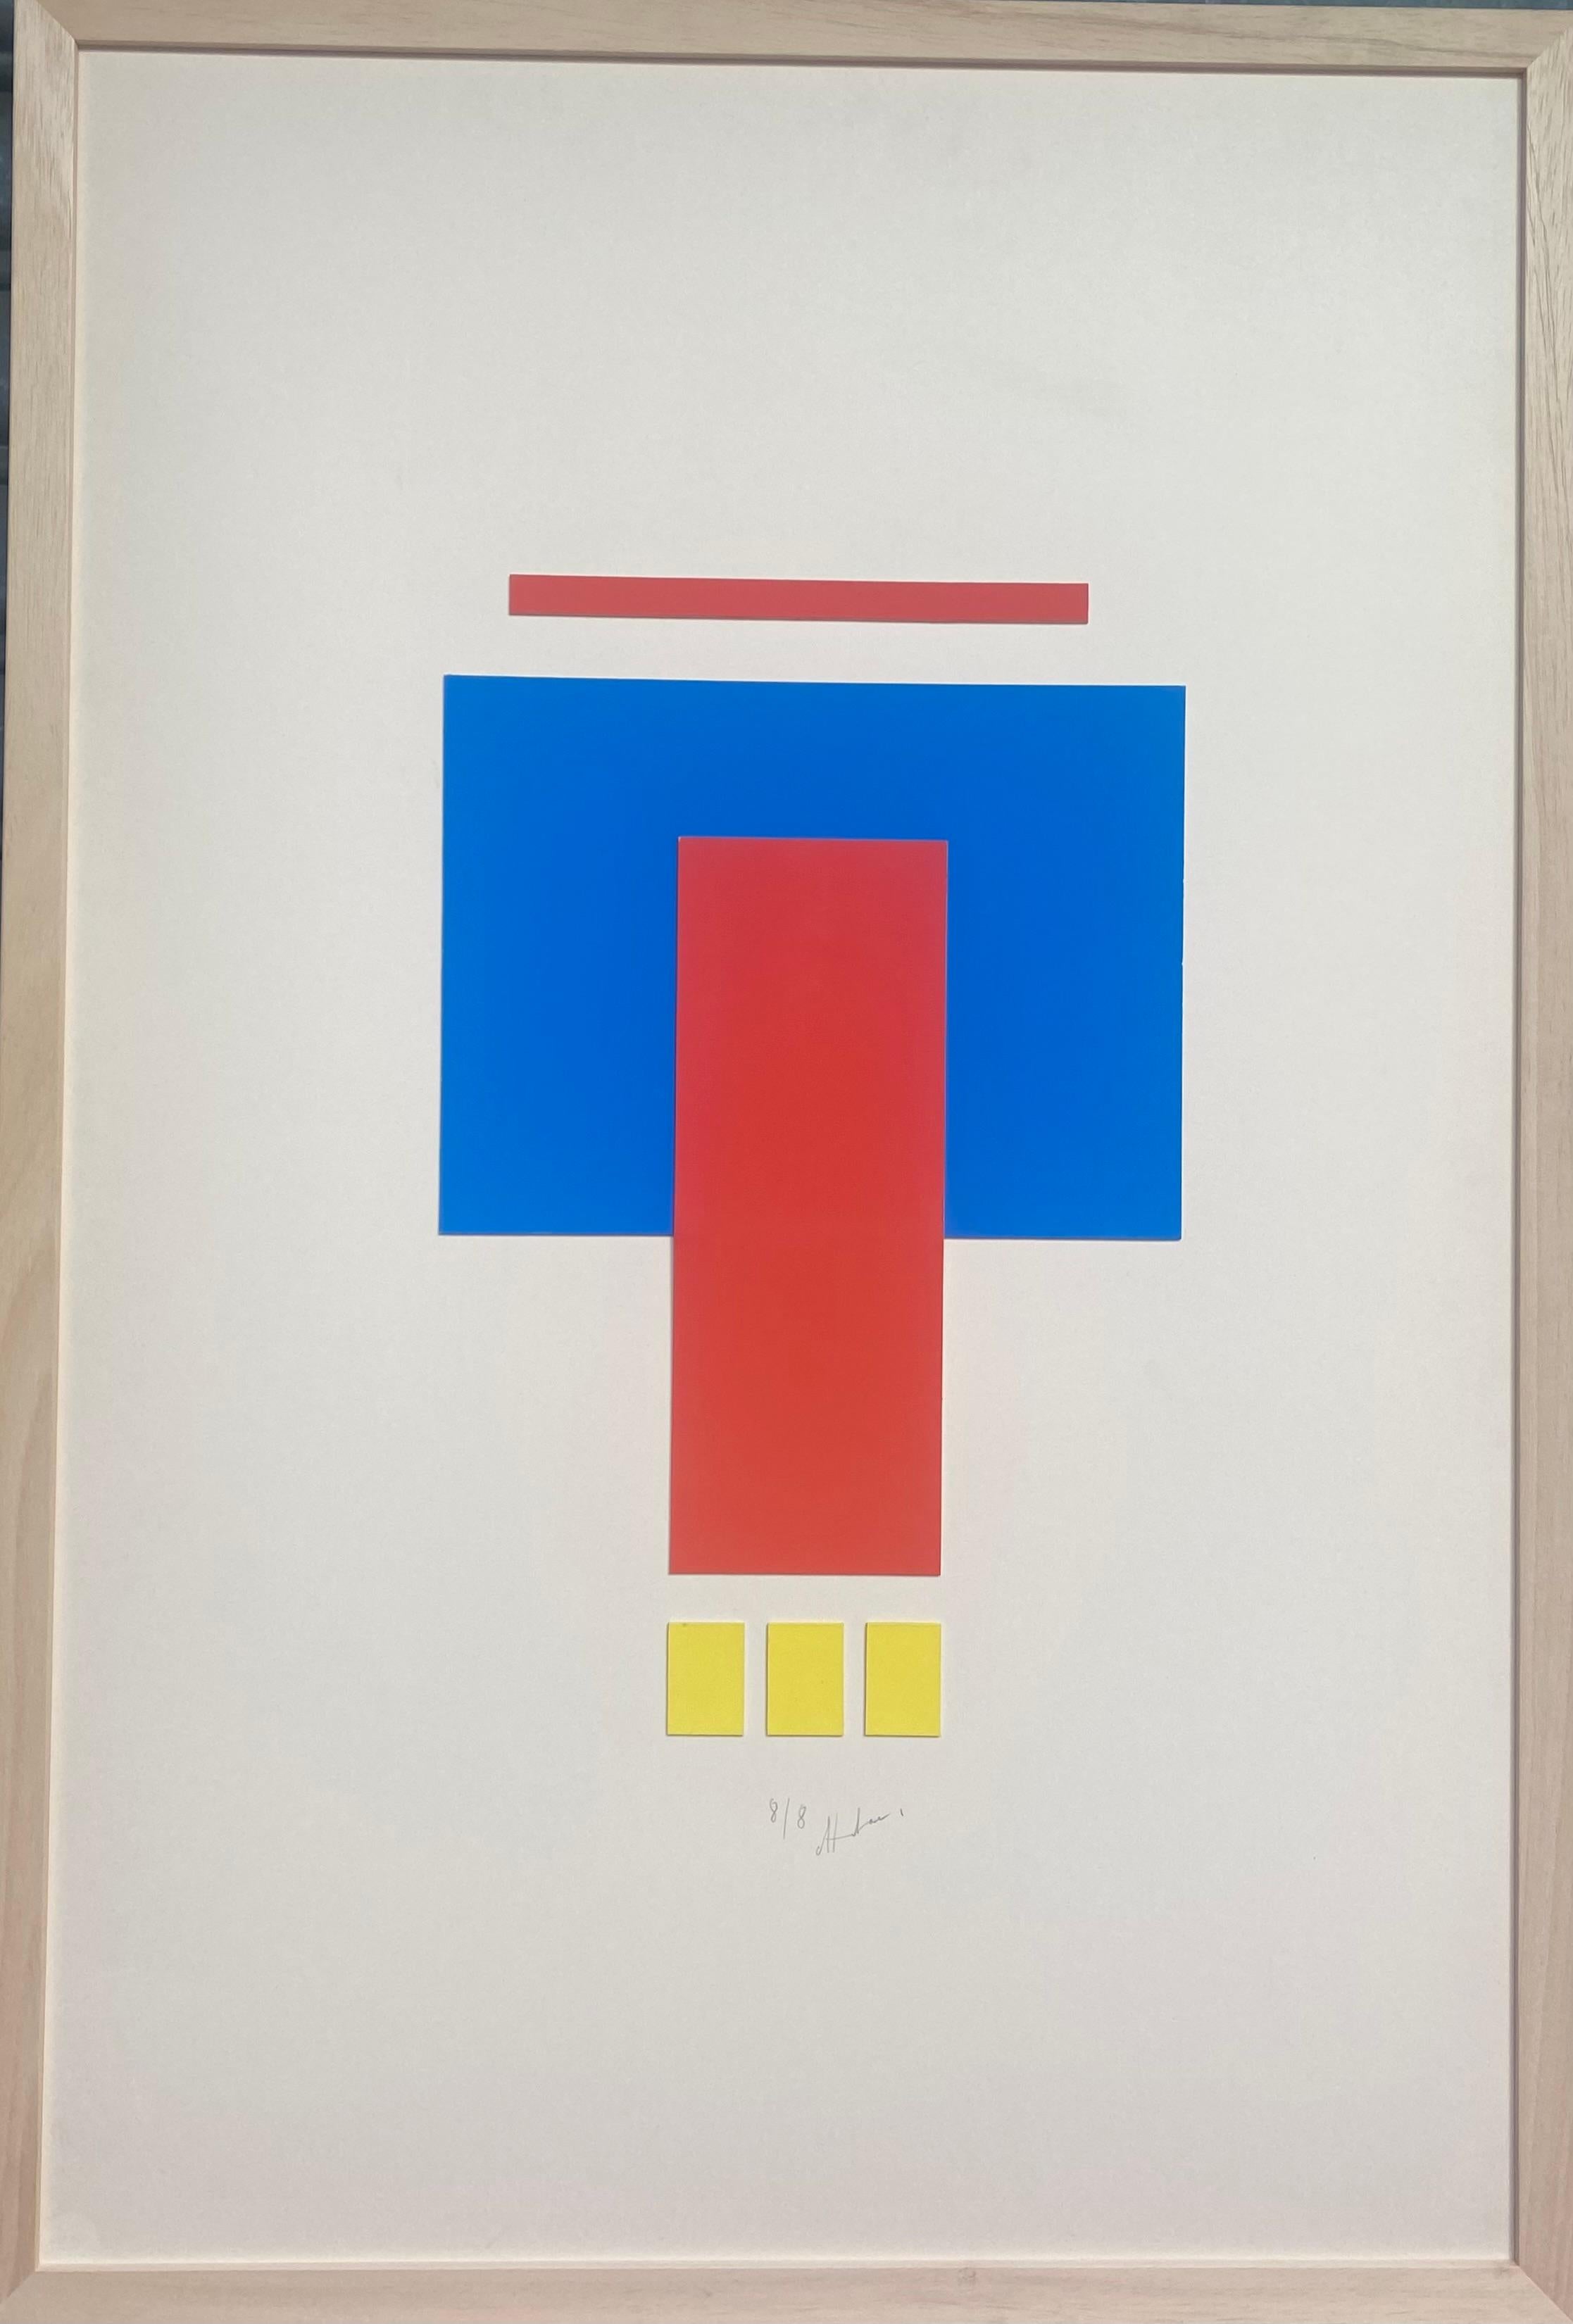 Albert Chubac (1925-2008)
Geometric composition
Cutting and collage. 
Signed and numbered 8/8 
Dimensions ; 118.5 x 78.5 Cm.
Price : 3200€.

Who is Albert Chubac? 

Albert Chubac was born in 1925 in Geneva.
Figuration Libre: In 1947,